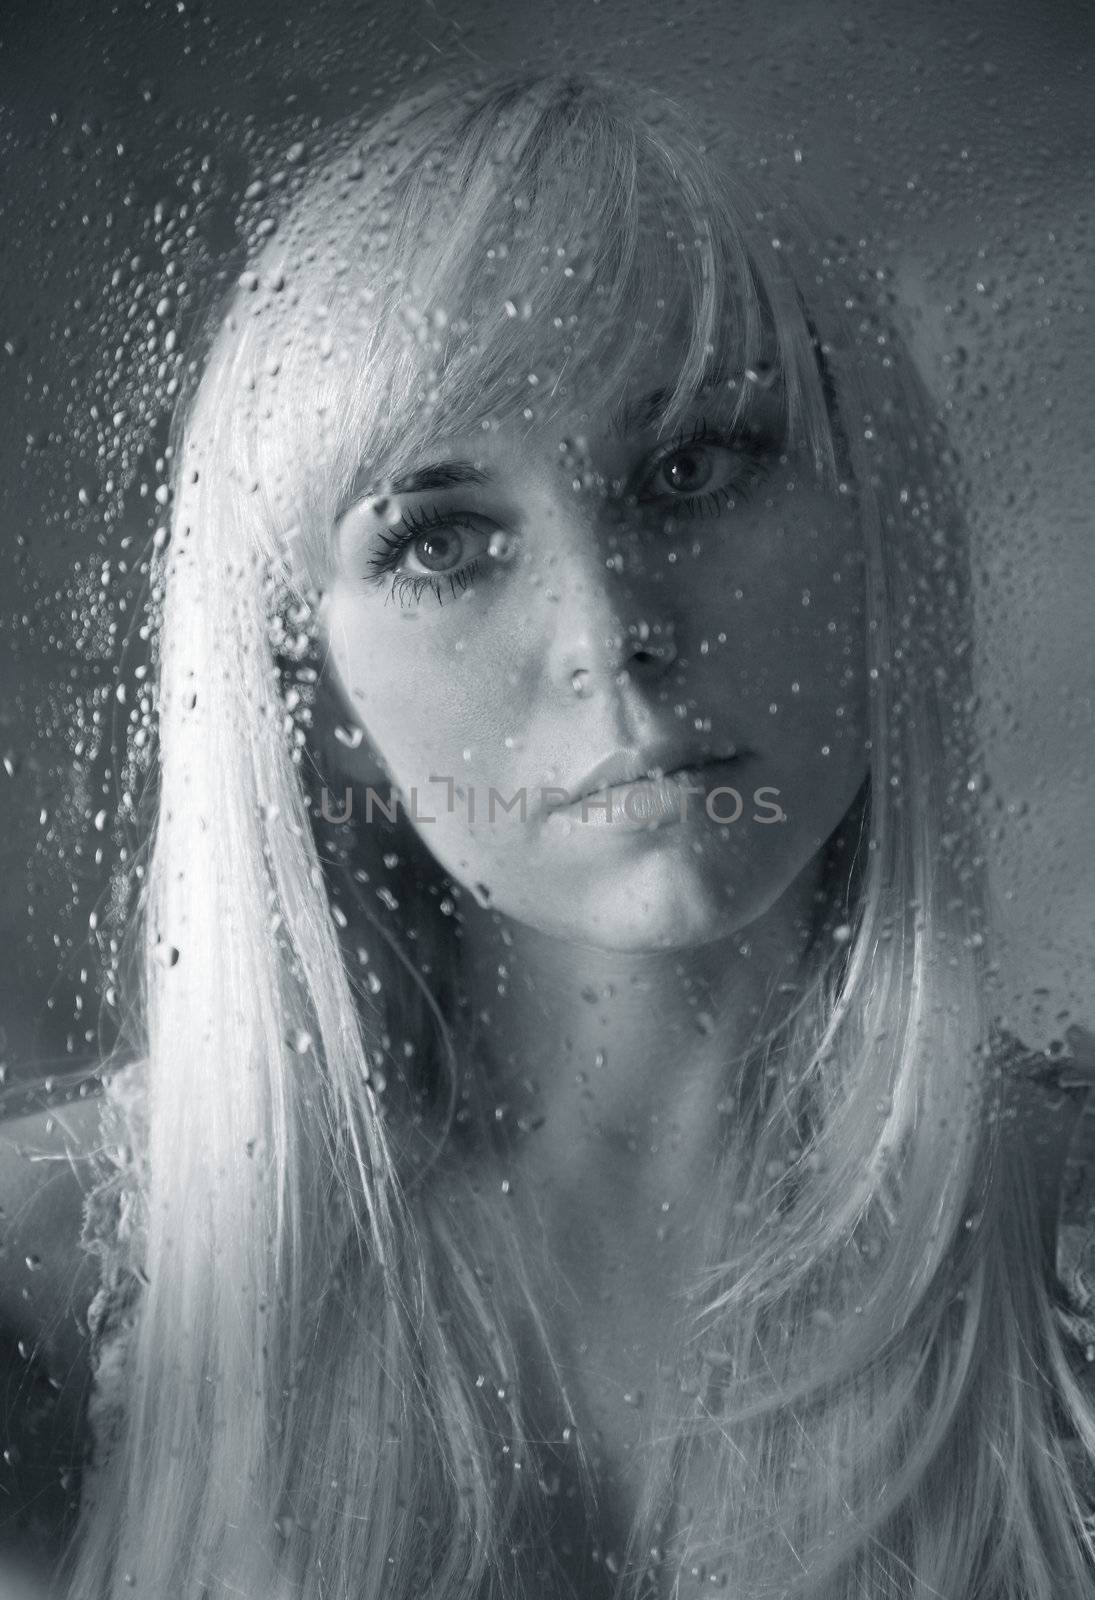 The beautiful girl behind wet glass